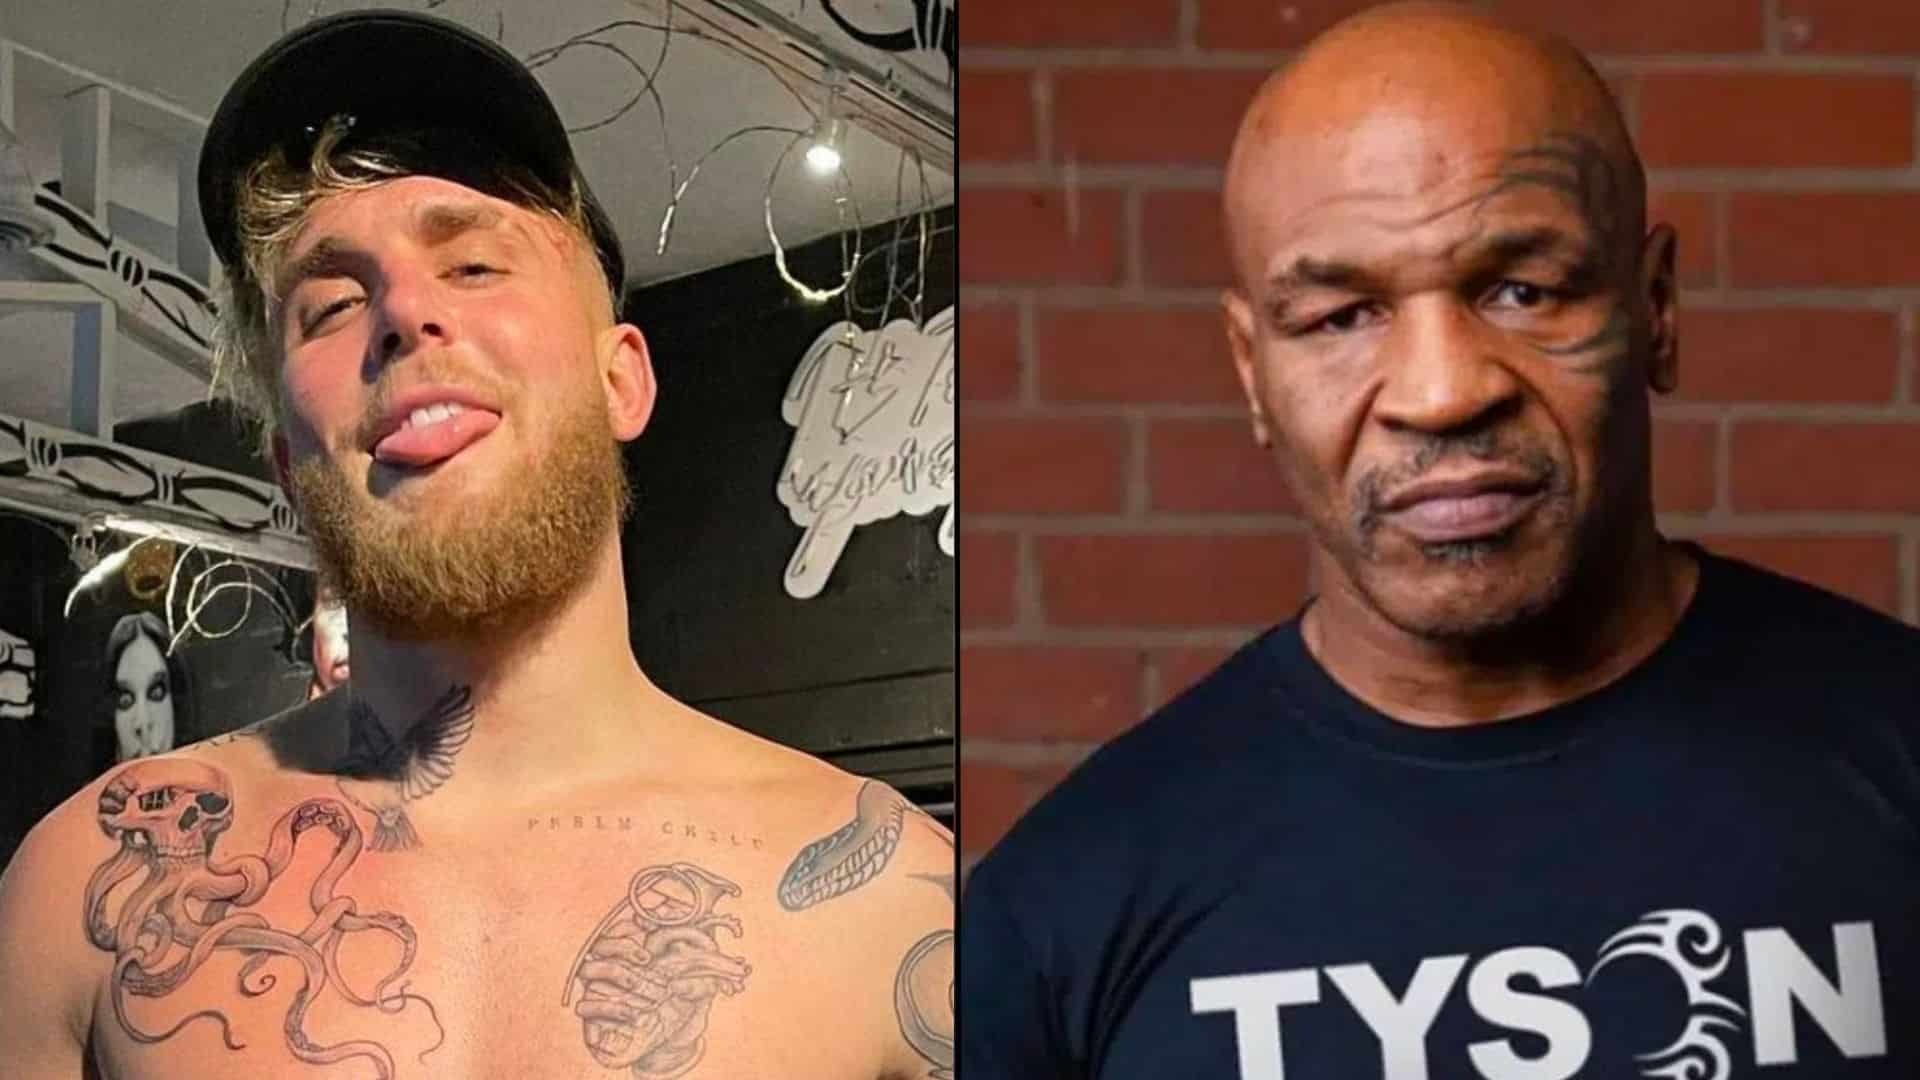 Jake Paul side-by-side with Mike Tyson